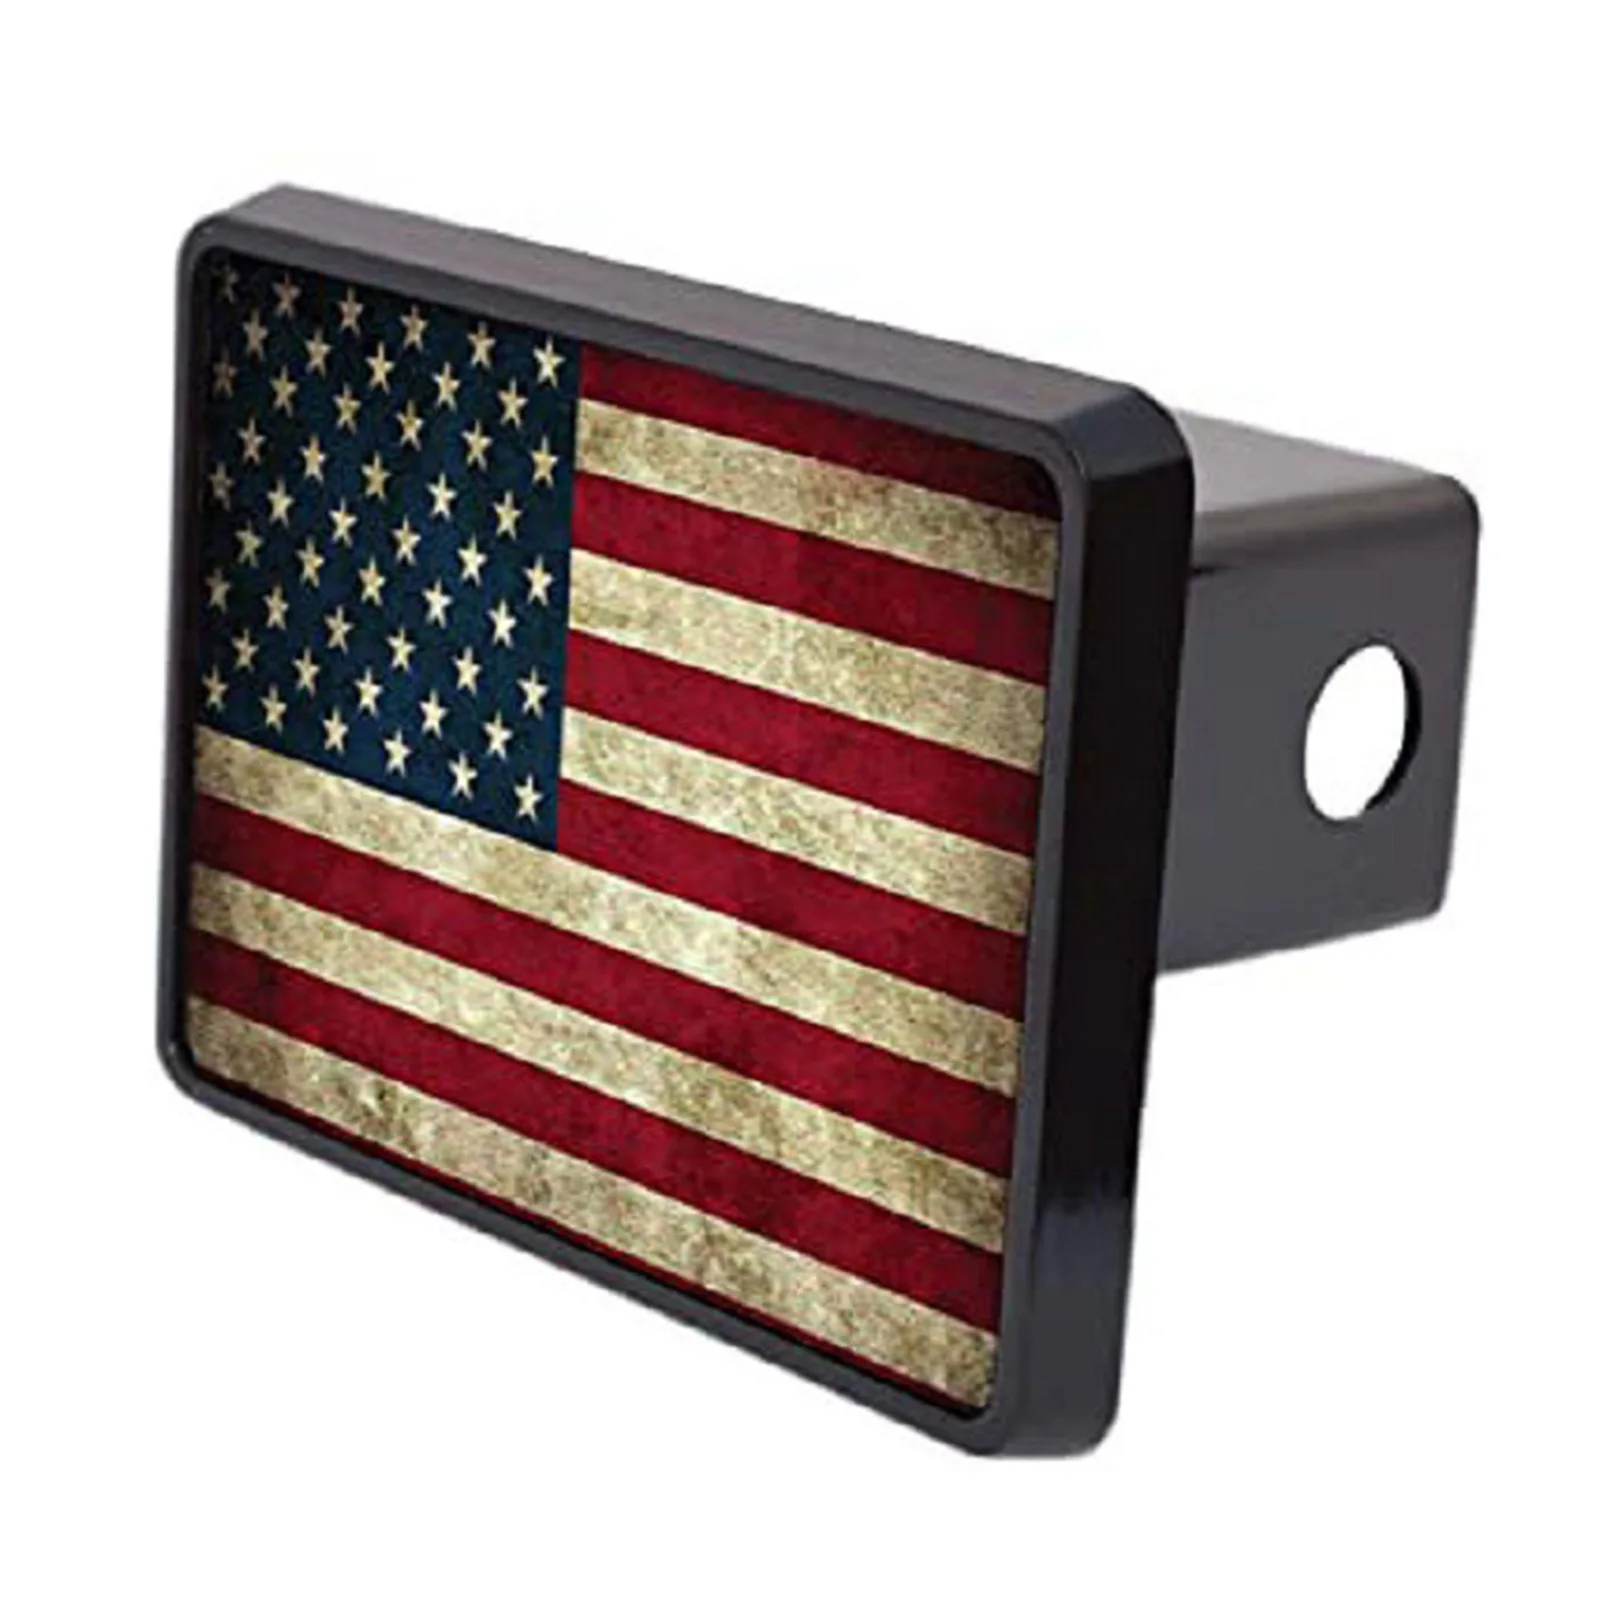 

Trailer Hitch Cover Tow Rear Receivers Plug Covers With American Flag Emblem Guard Trailer Buckle Cover For Trucks Cars Su-v